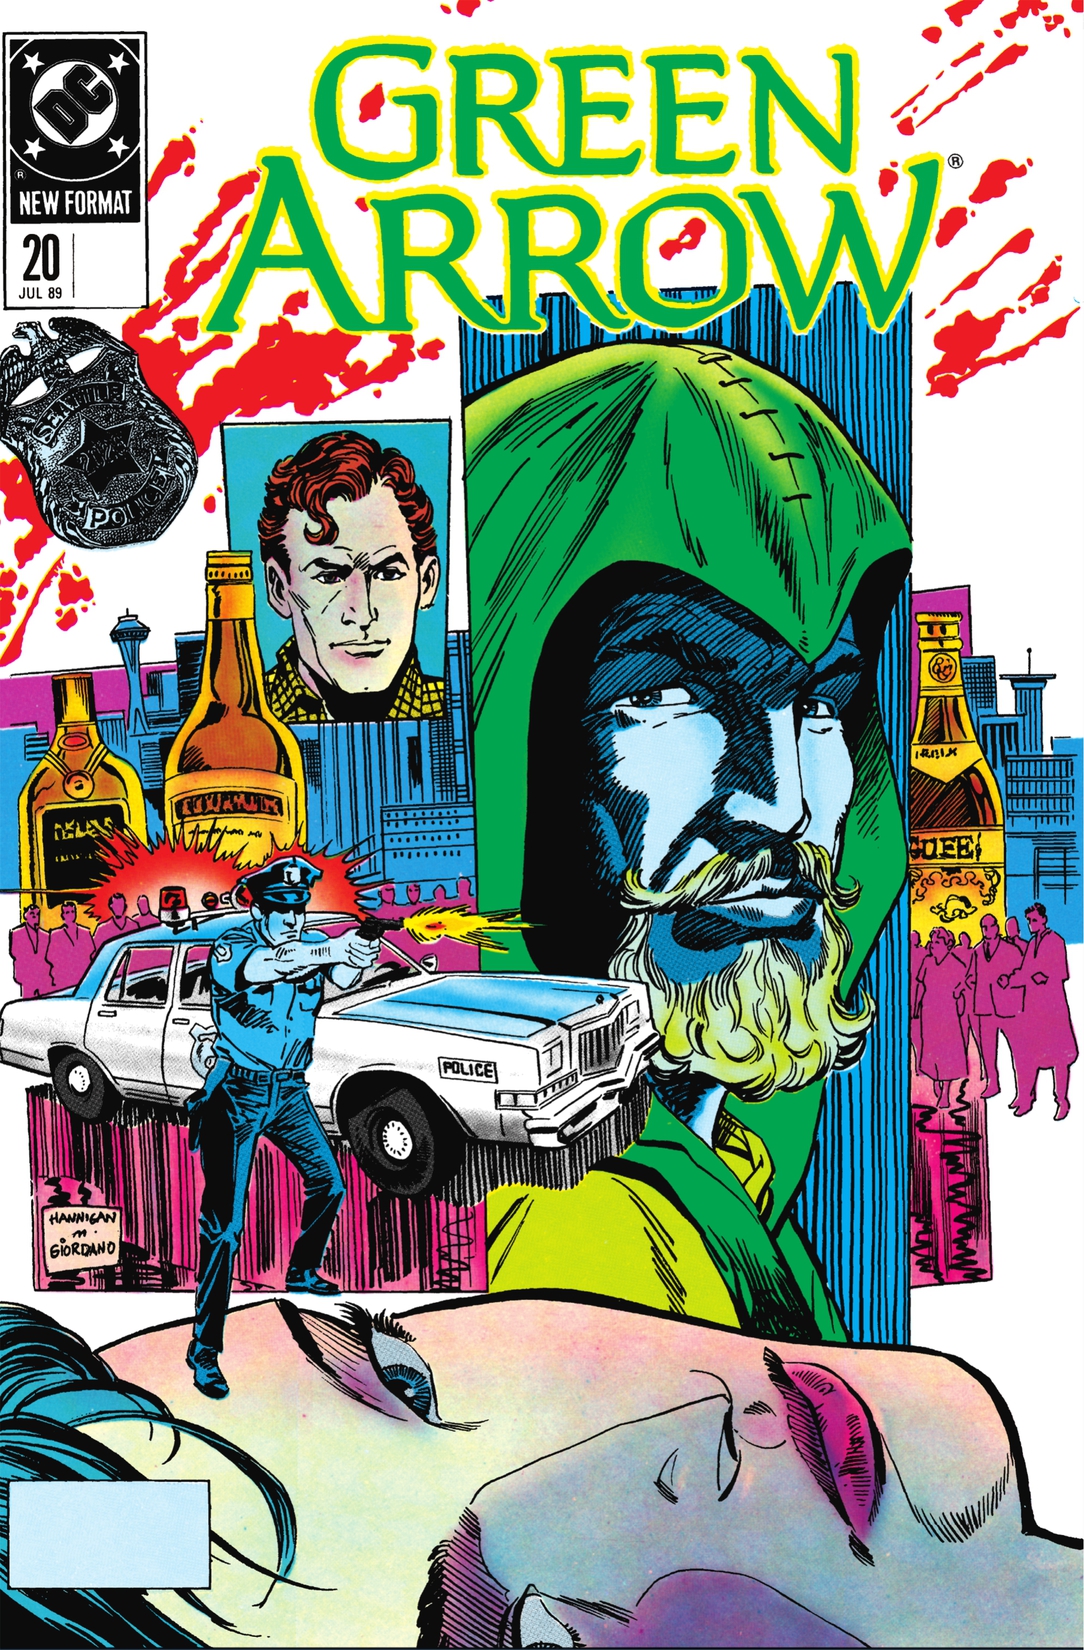 Green Arrow (1987-) #20 preview images